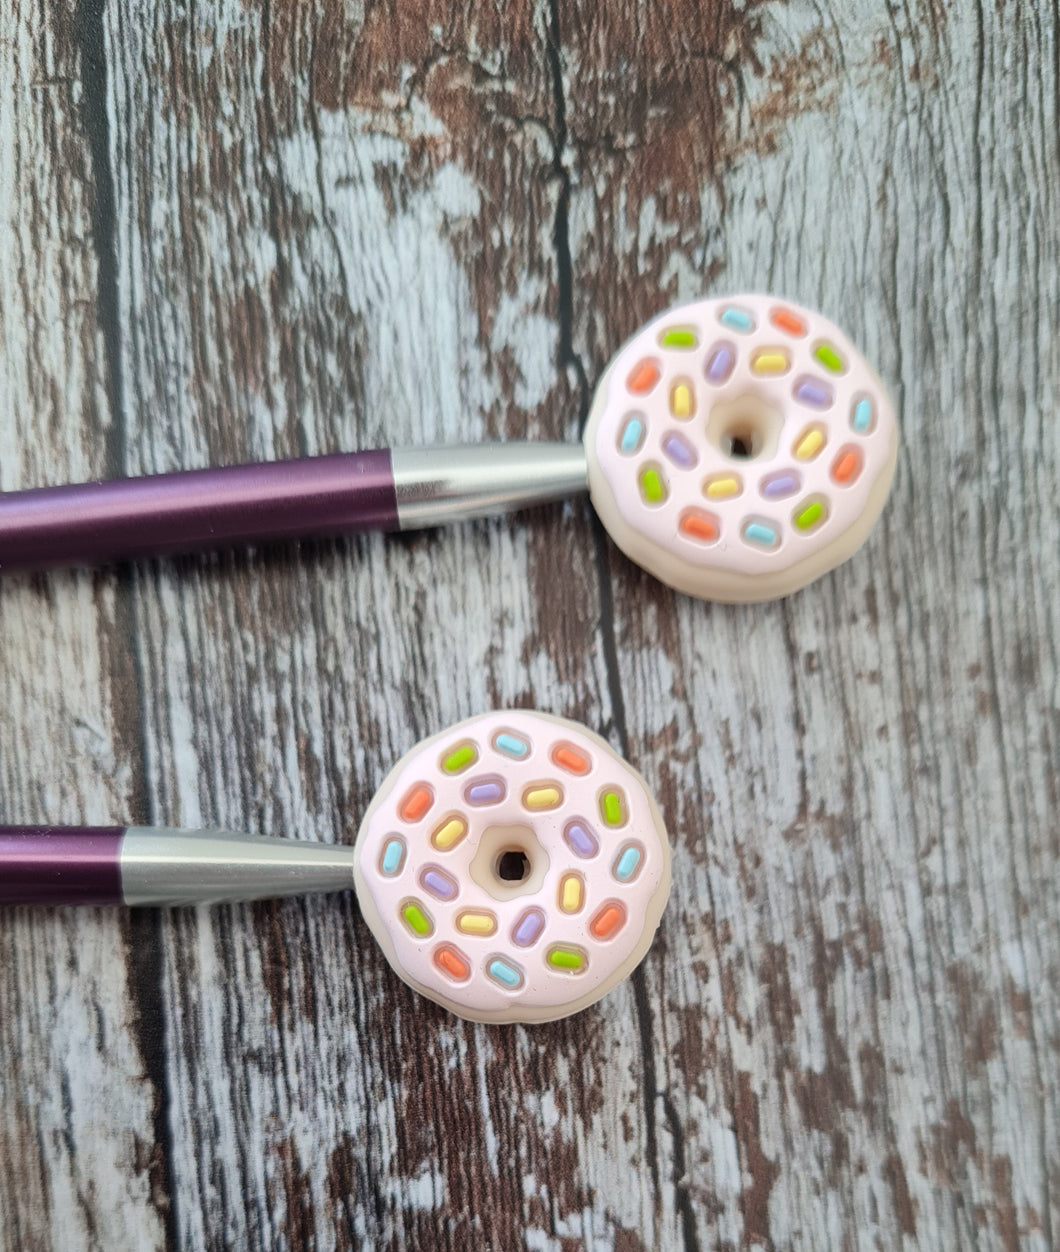 Knitting stoppers.Donuts with sprinkles.